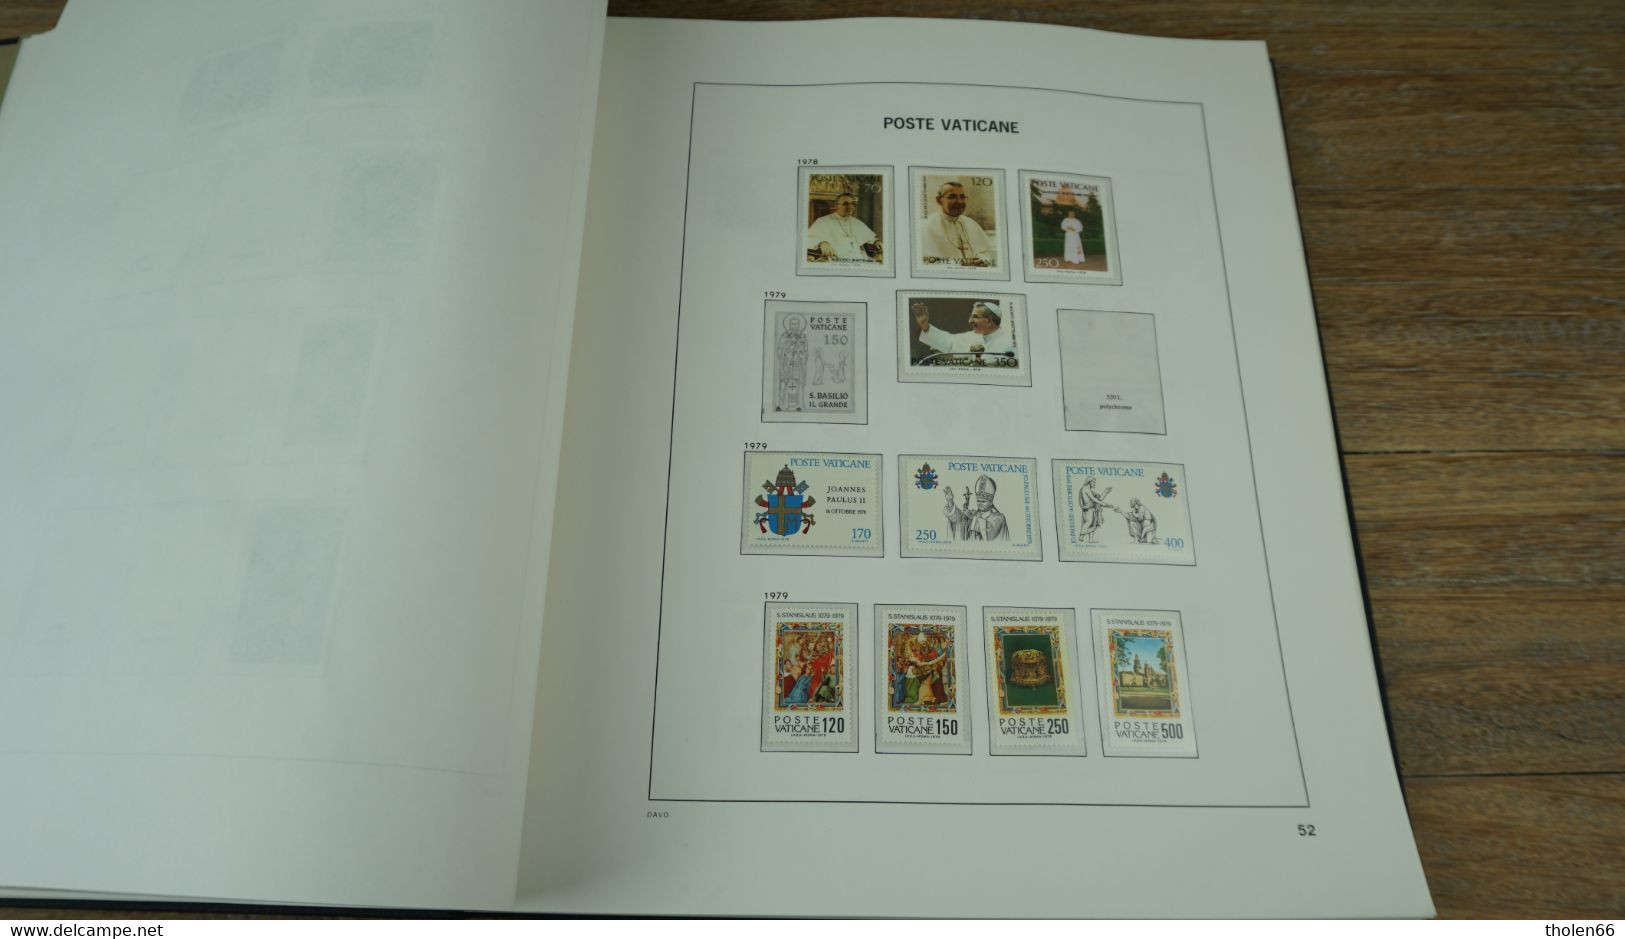 Vatican Poste - Album DAVO  1852 - 2001 - Nice Collection (incomplete) ** Mint Never Hinged. - Collections